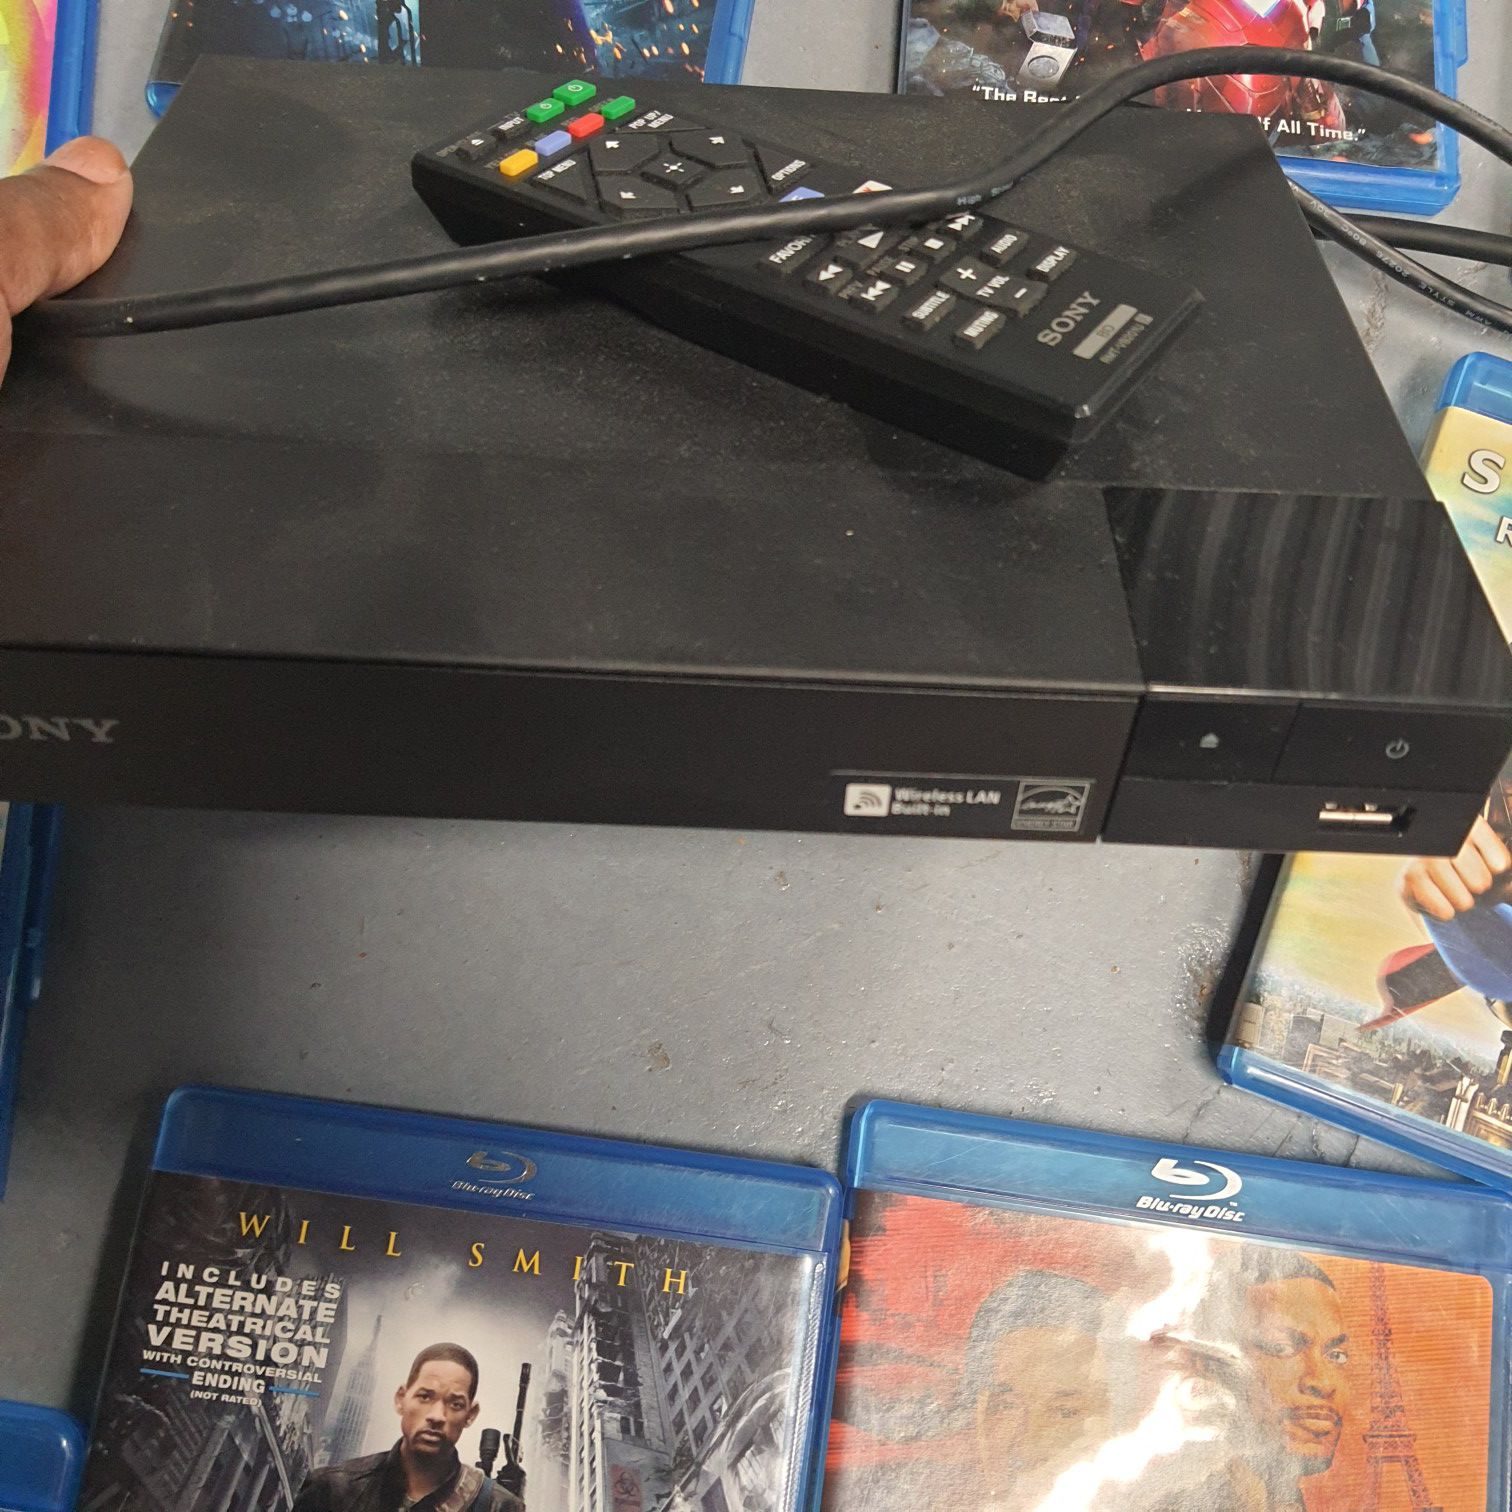 Blu ray dvd player and movies